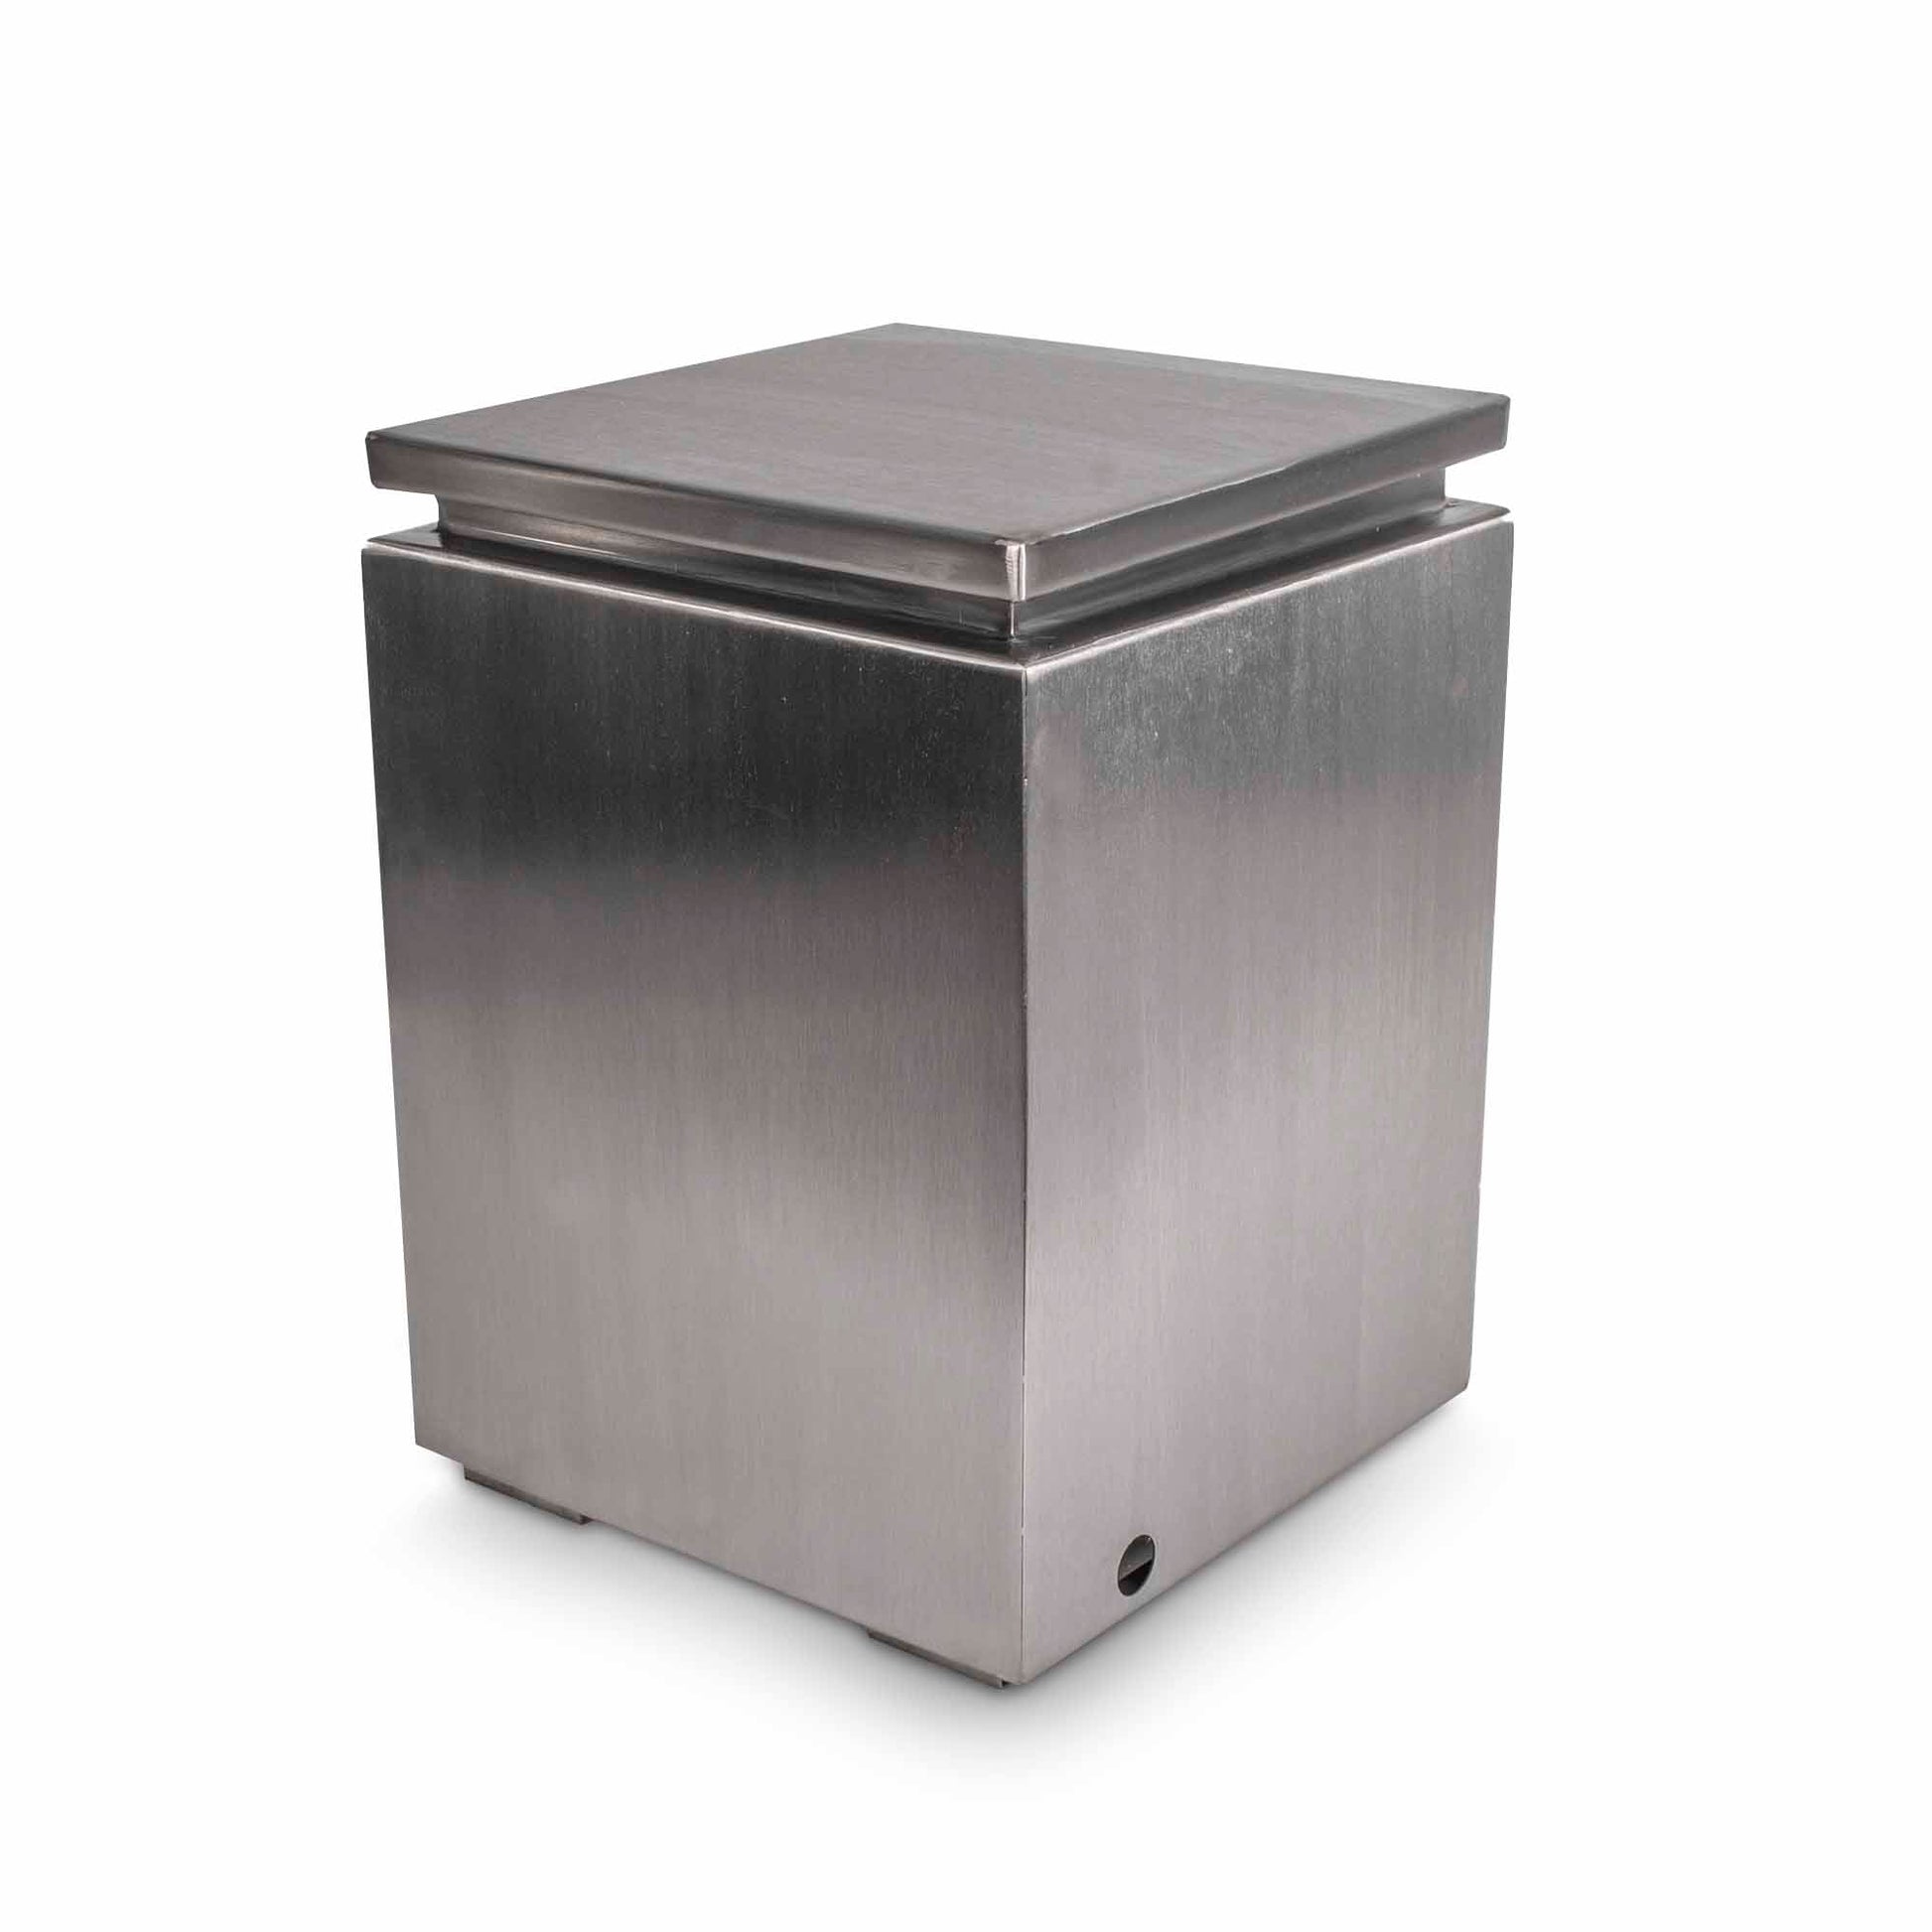 The Outdoor Plus 21" Square Stainless Steel Propane Tank Enclosure with Removable Lid